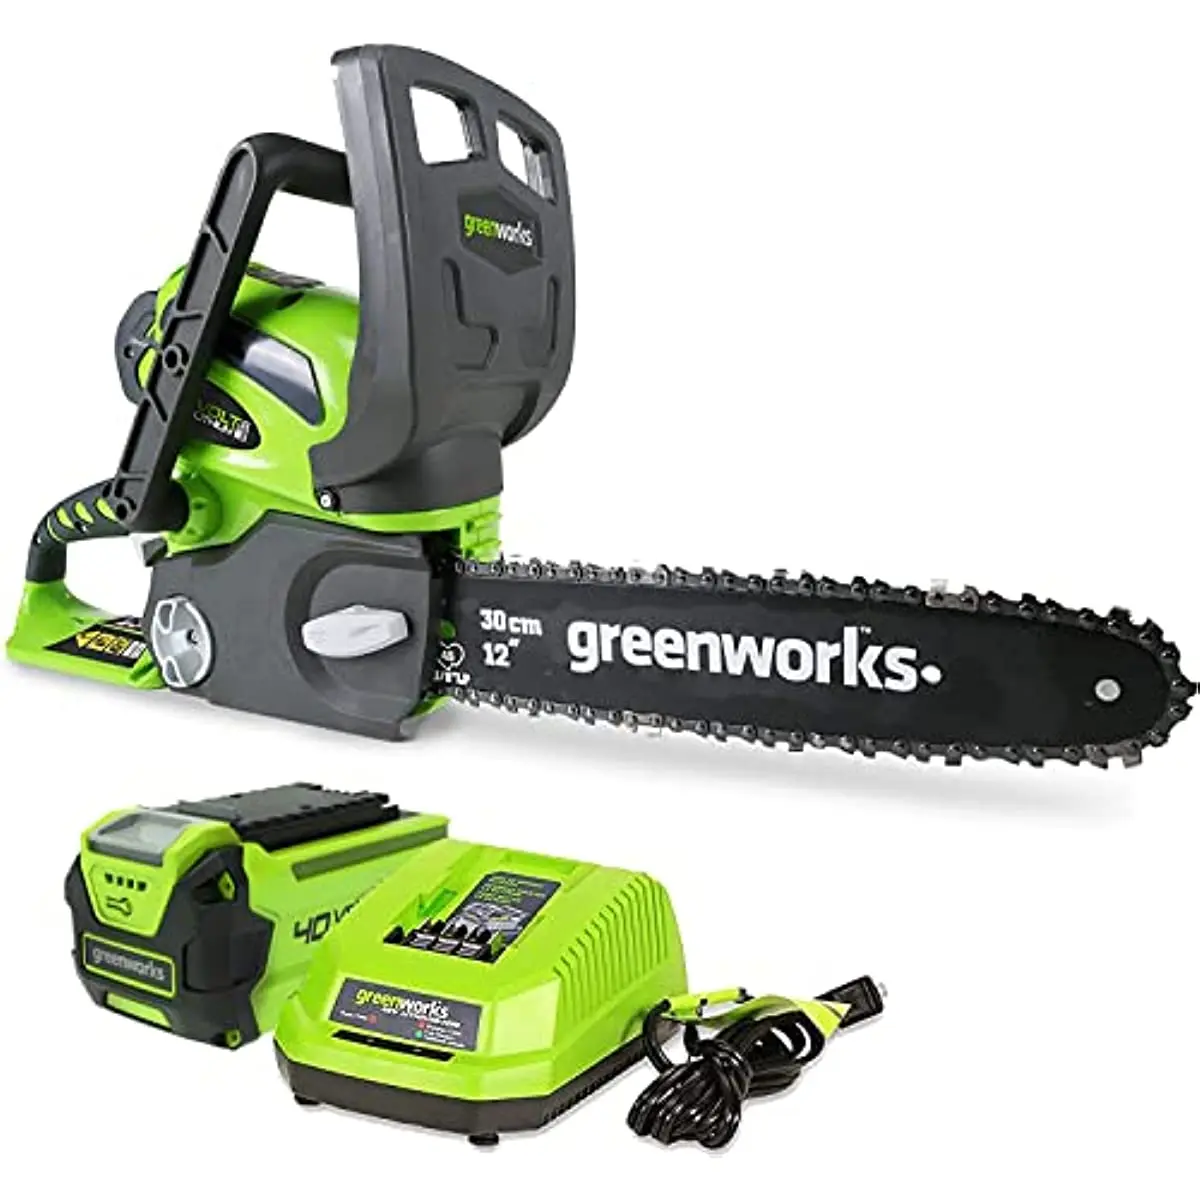 

Greenworks 40V 12" Chainsaw, 2.0Ah Battery and Charger Included